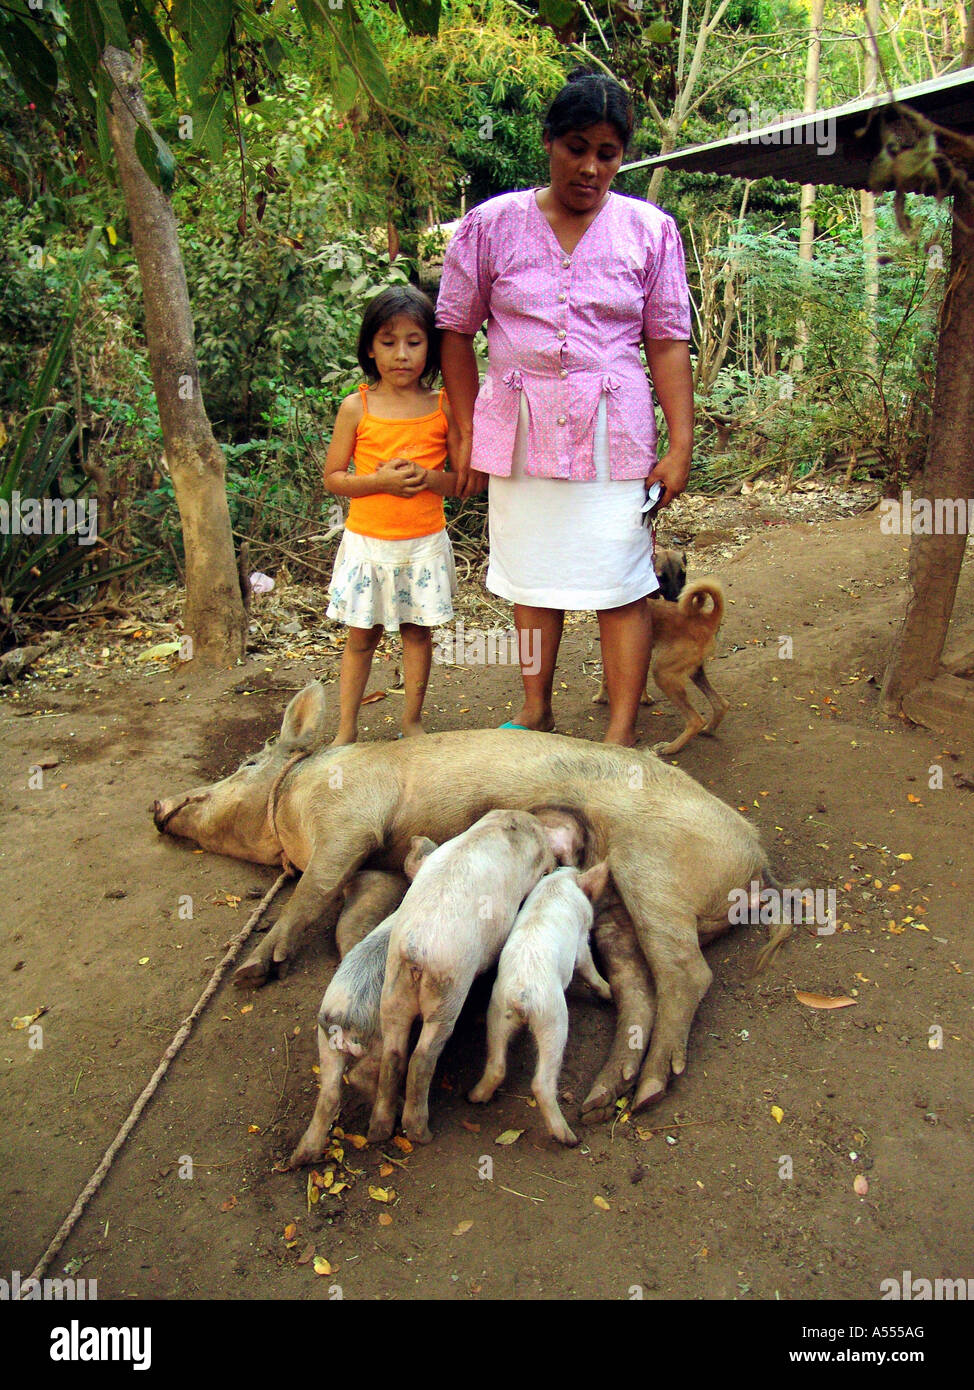 Painet ip2526 salvador mother children watching pig feed babies san francsisco javier country developing nation less Stock Photo